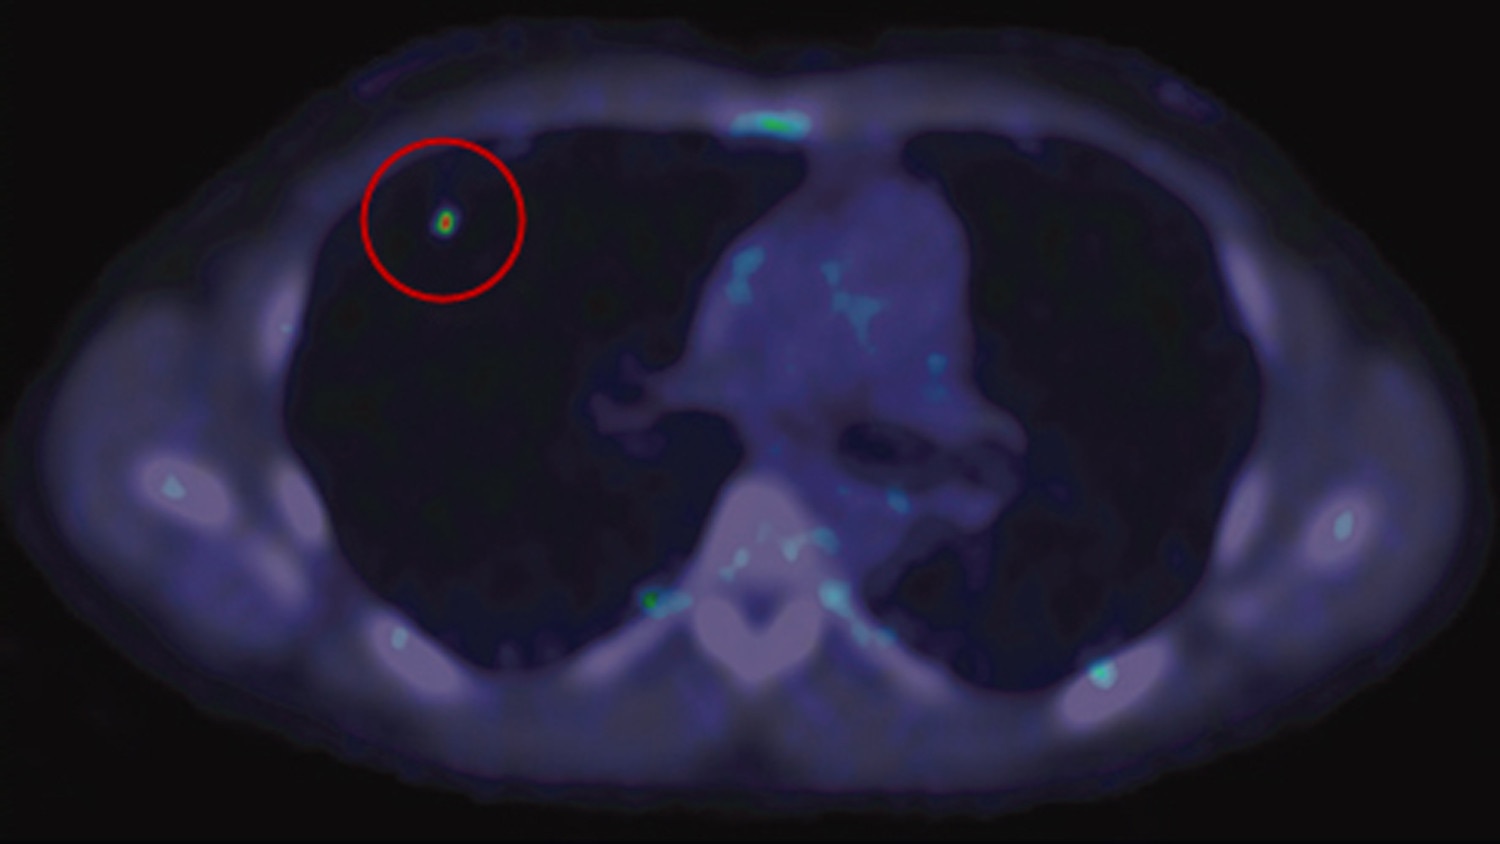 product-product-categories-pet-ct-qclear-gehc-qclear-clinical-image1-thumbnail.jpg